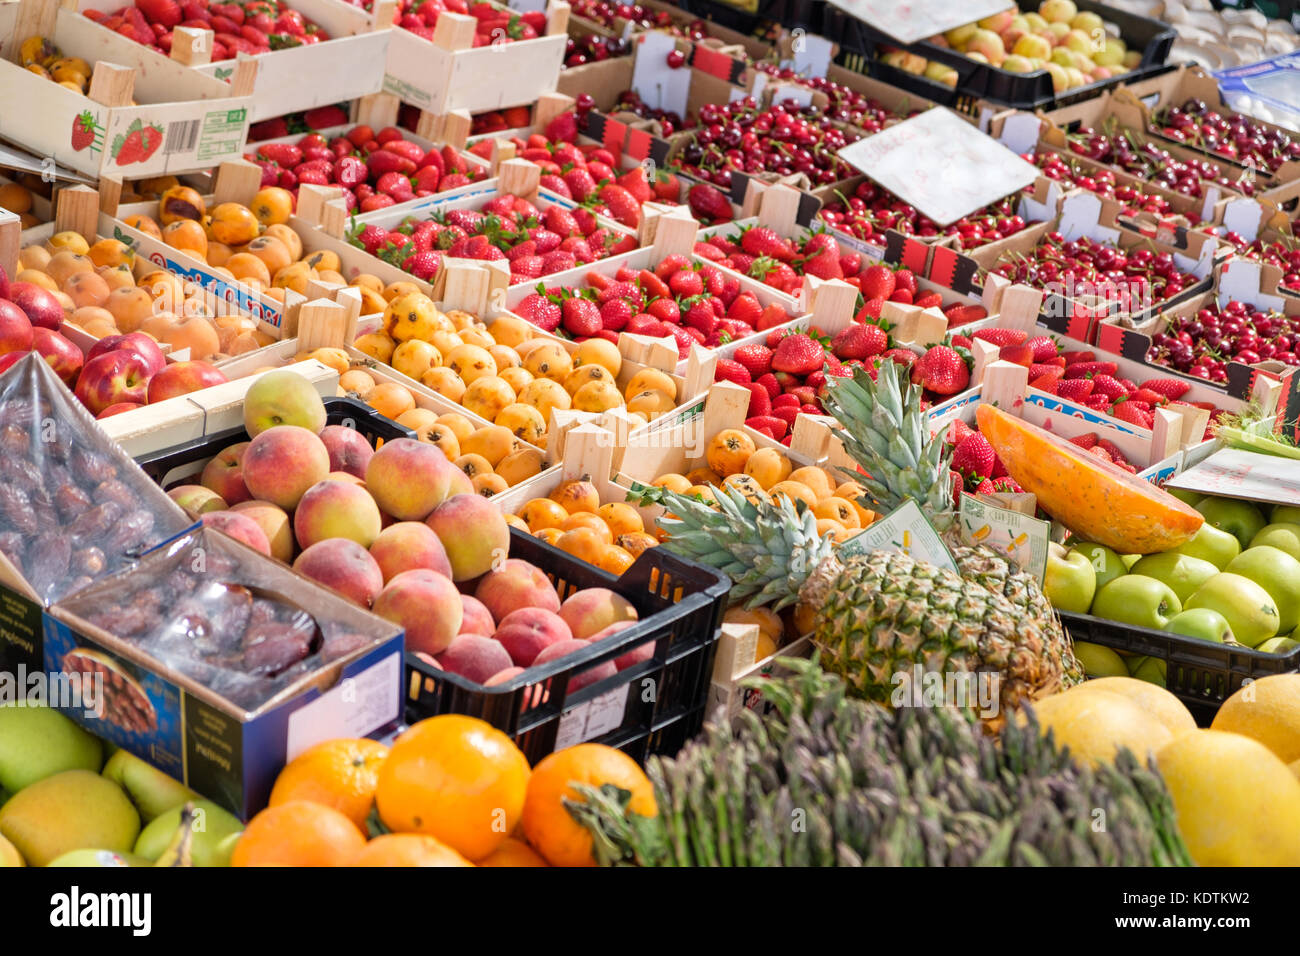 Fresh organic fruit and vegtables on a market stall. Stock Photo